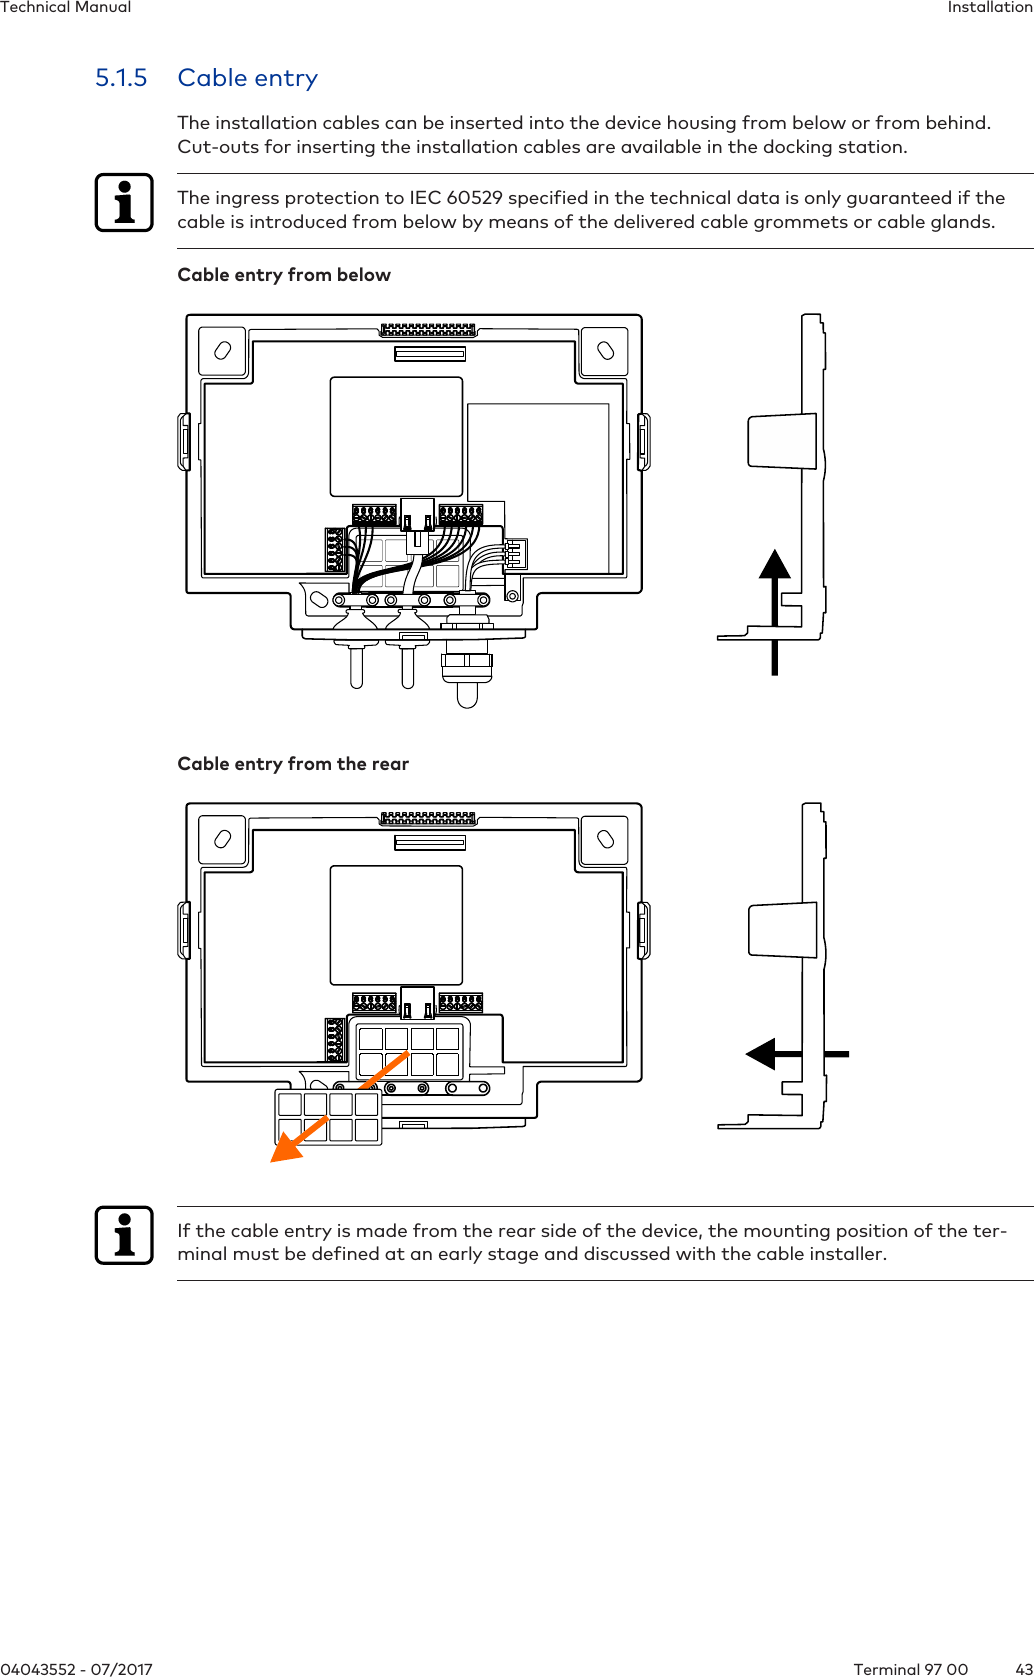 InstallationTechnical Manual4304043552 - 07/2017 Terminal 97 005.1.5 Cable entryThe installation cables can be inserted into the device housing from below or from behind.Cut-outs for inserting the installation cables are available in the docking station.The ingress protection to IEC 60529 specified in the technical data is only guaranteed if thecable is introduced from below by means of the delivered cable grommets or cable glands.Cable entry from belowCable entry from the rearIf the cable entry is made from the rear side of the device, the mounting position of the ter-minal must be defined at an early stage and discussed with the cable installer.